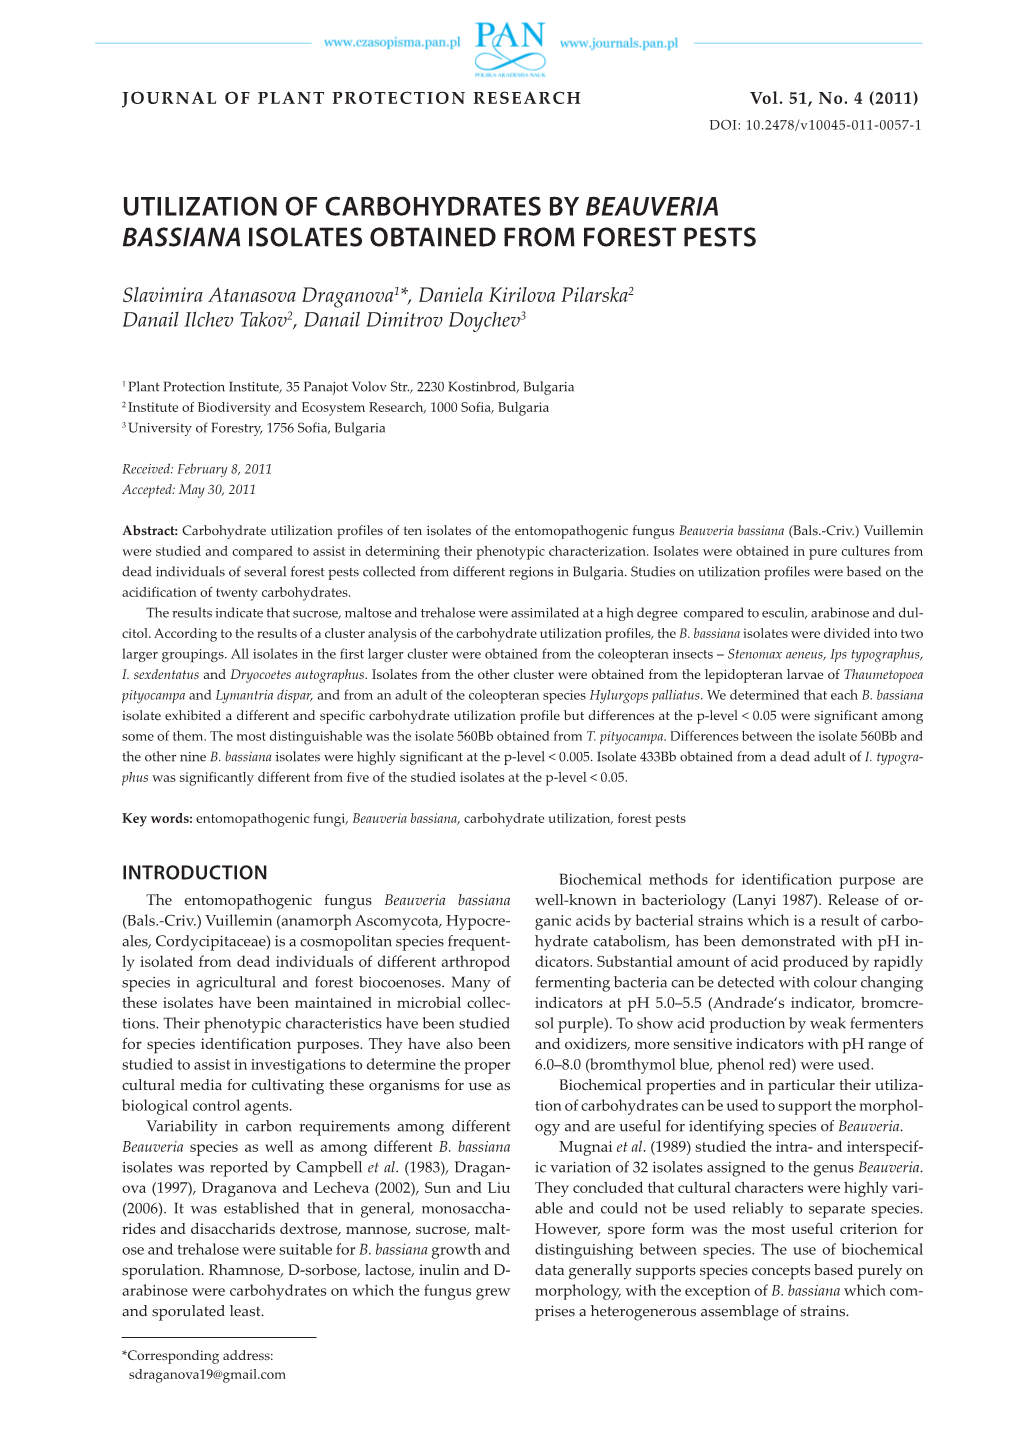 Utilization of Carbohydrates by Beauveria Bassiana Isolates Obtained from Forest Pests